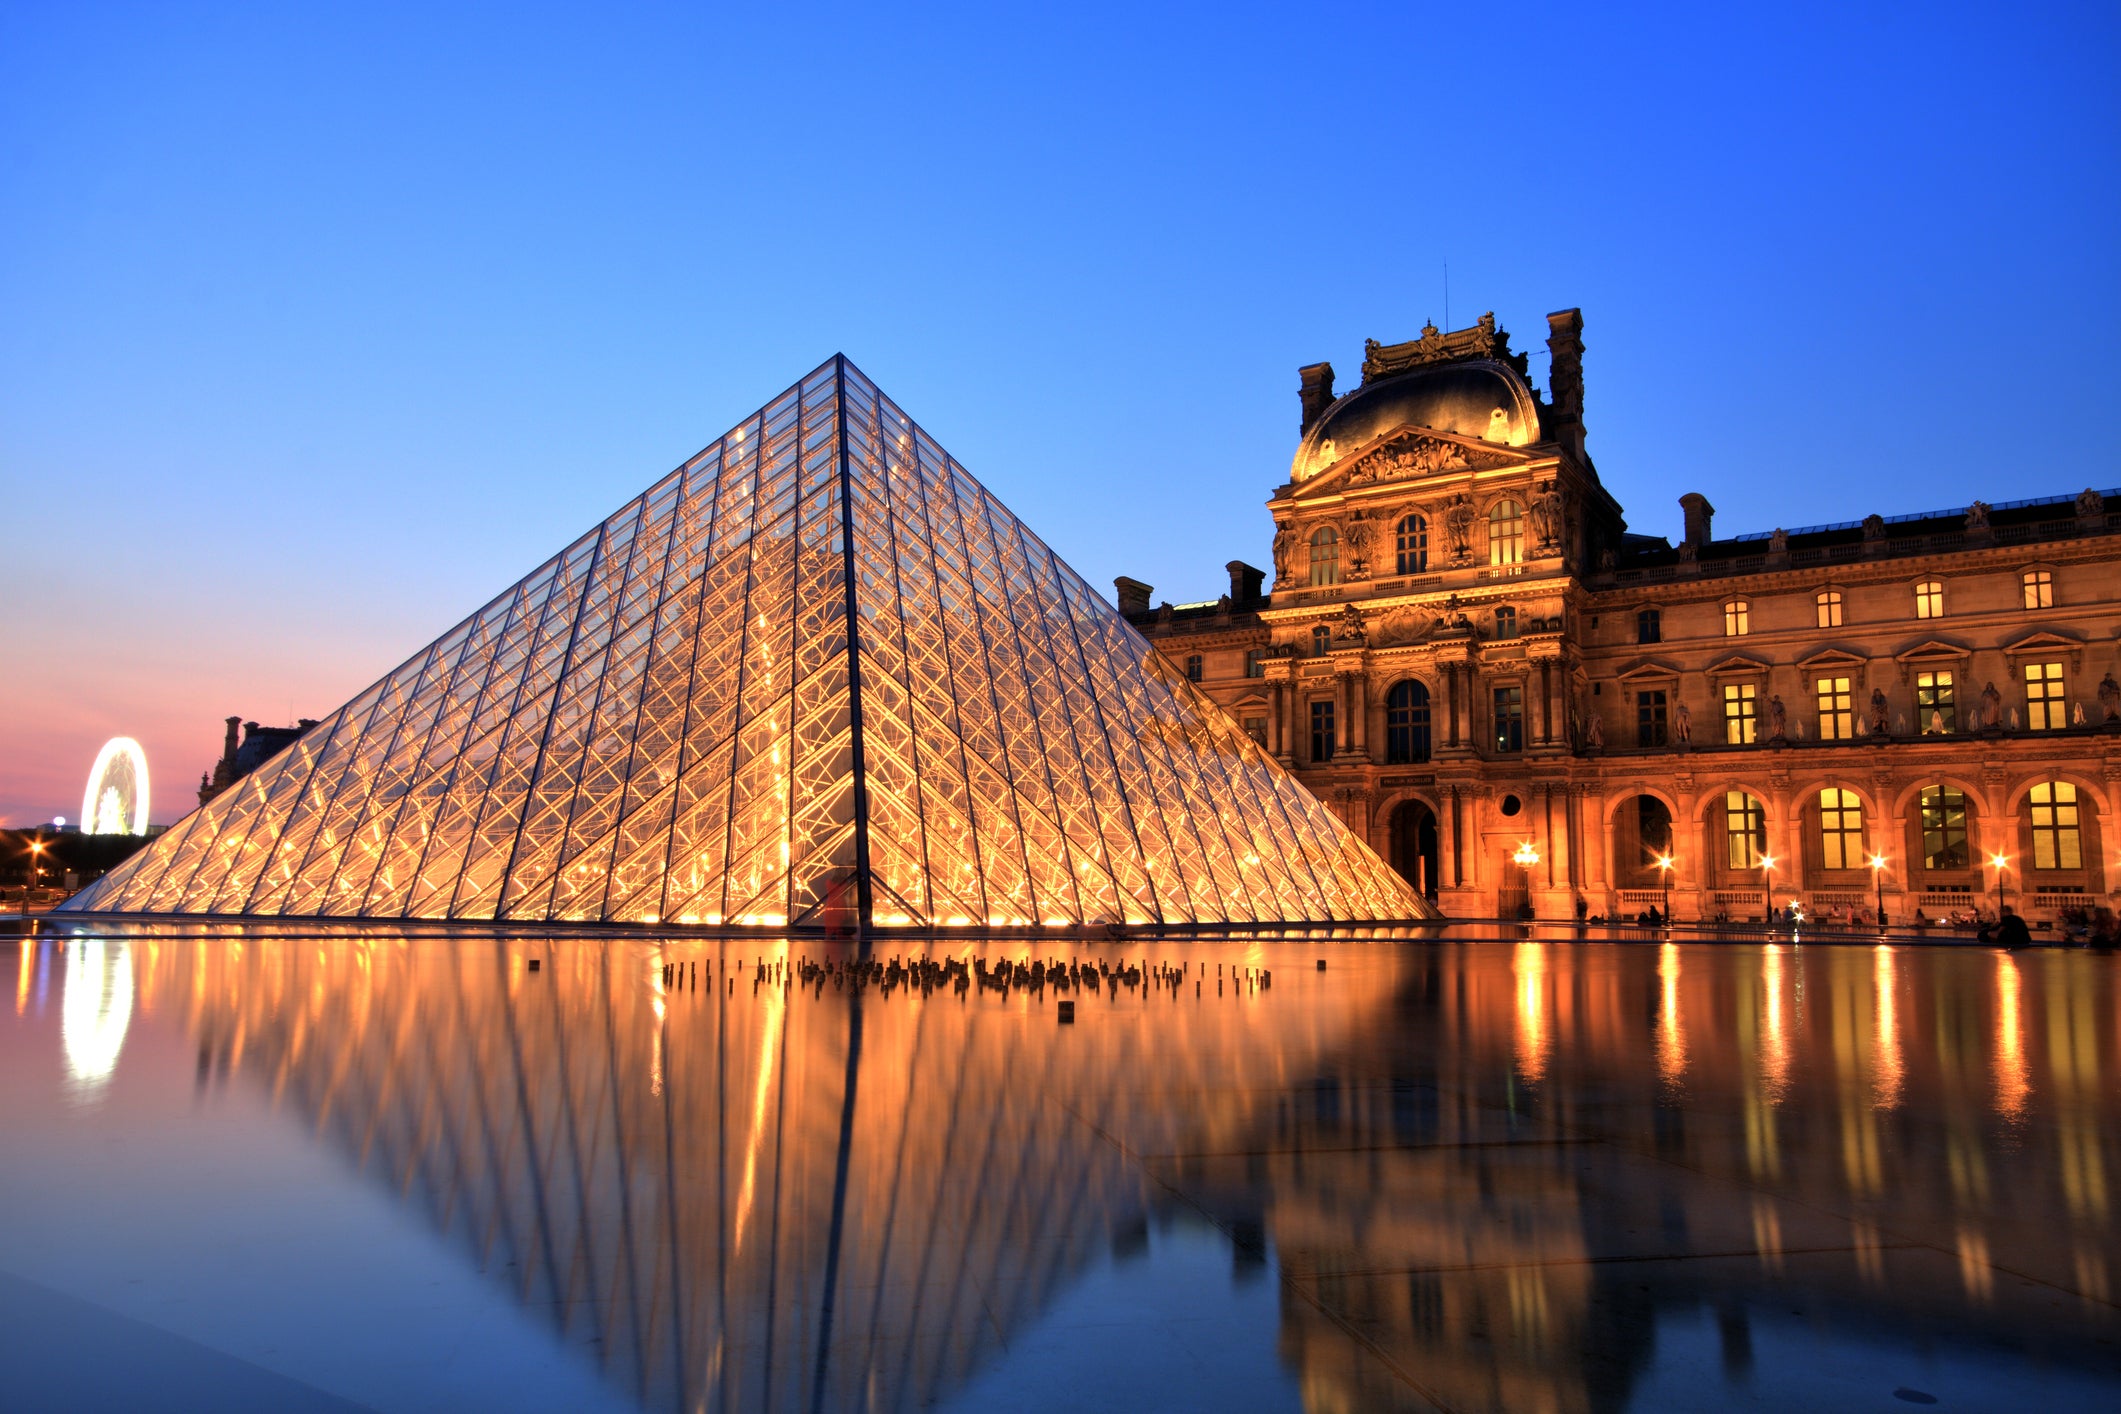 The Louvre first opened as a public museum in Paris in 1793